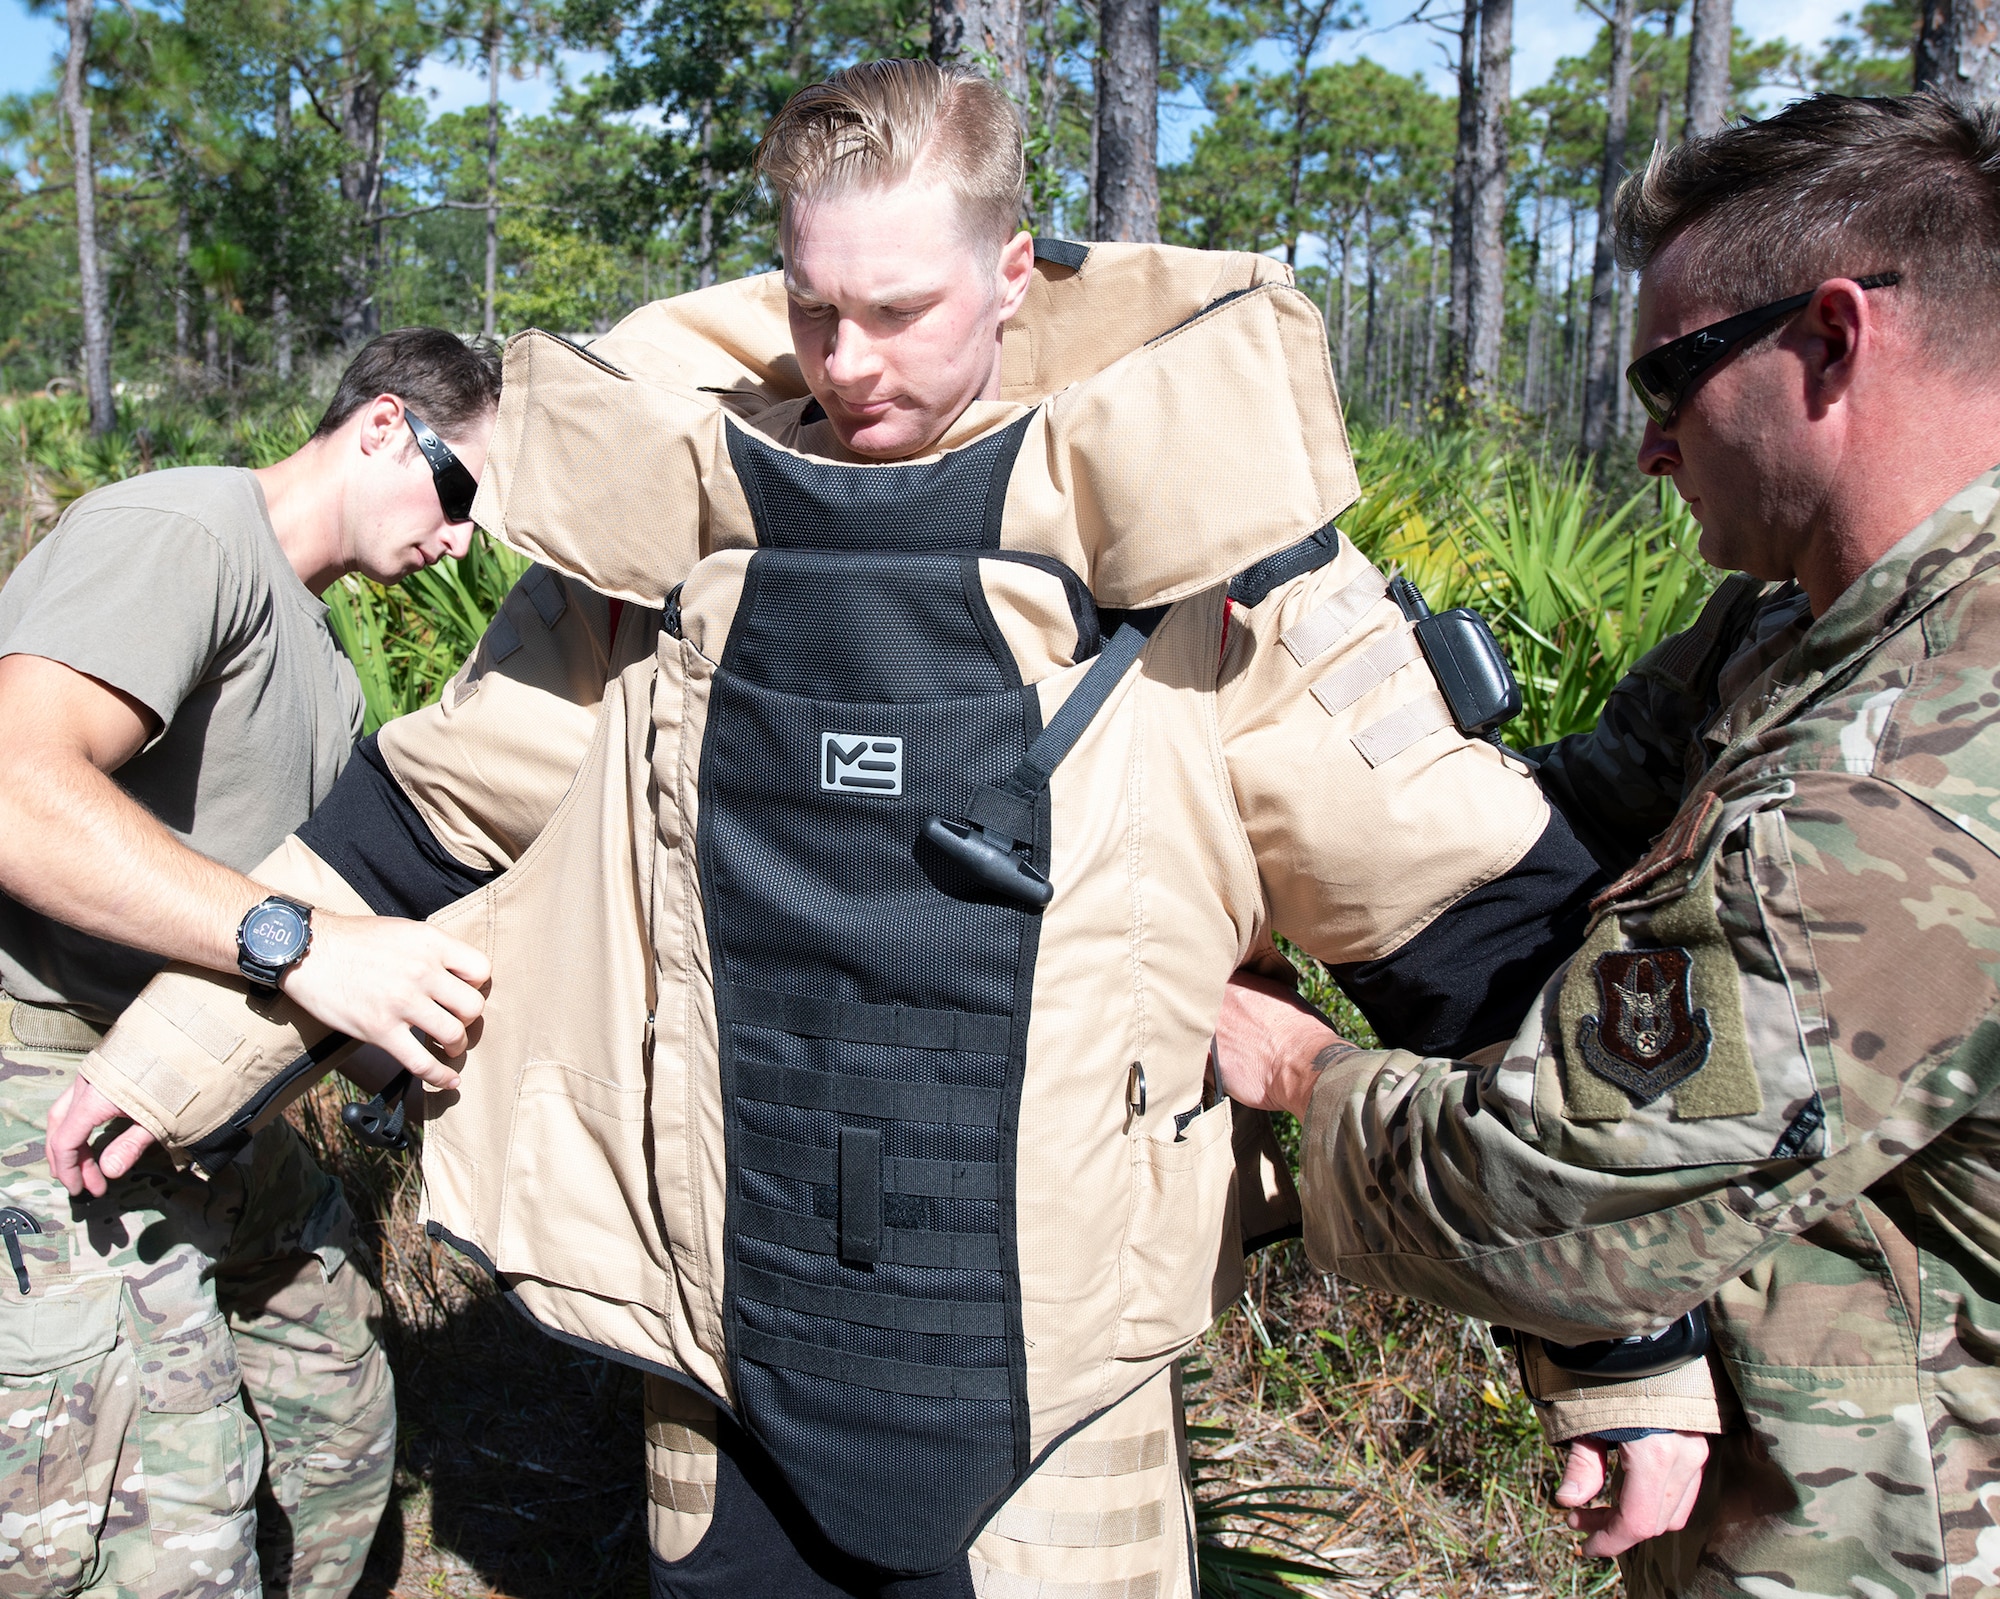 An EOD tech dons on a protective, bomb suit during an IED training scenario.